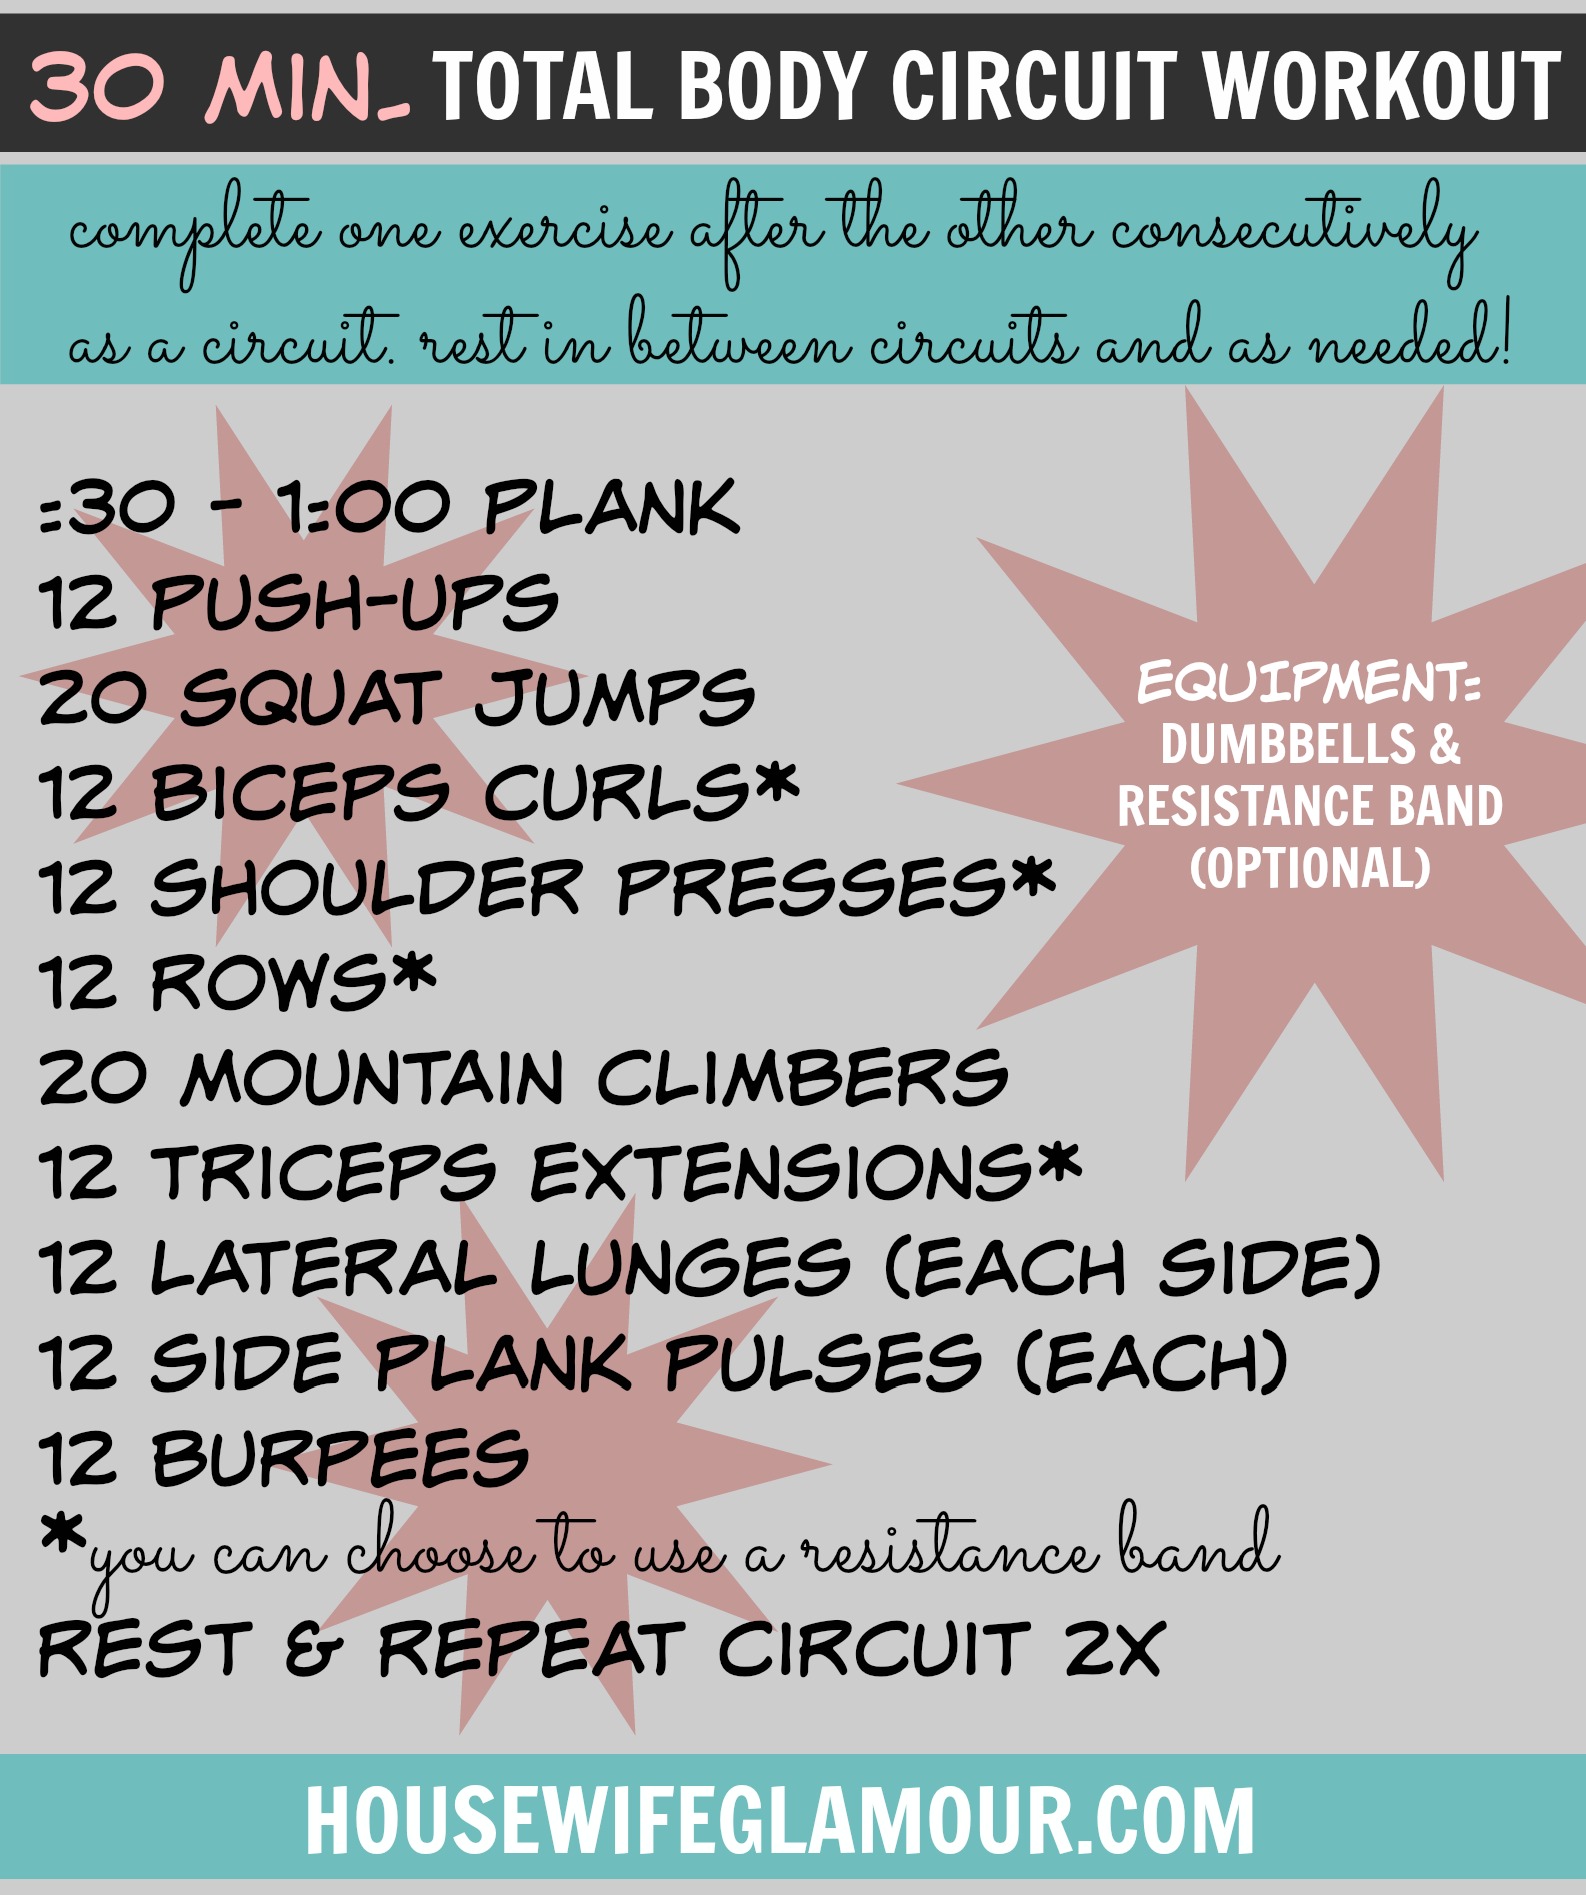 30 minute total body circuit workout